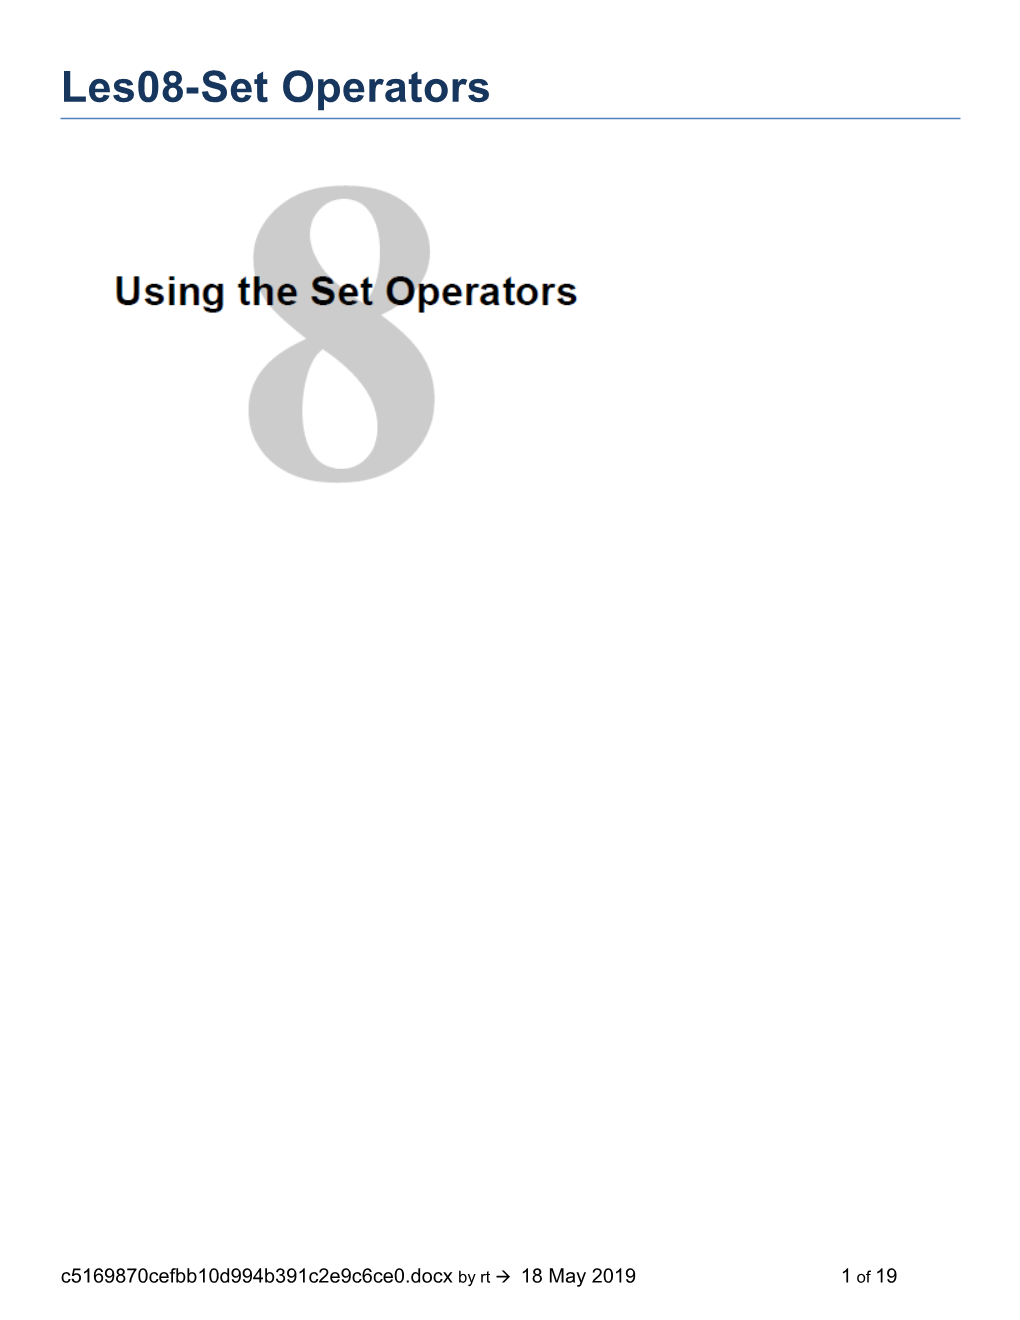 2Use Set Operators to Combine Multiple Queries Into a Single Query